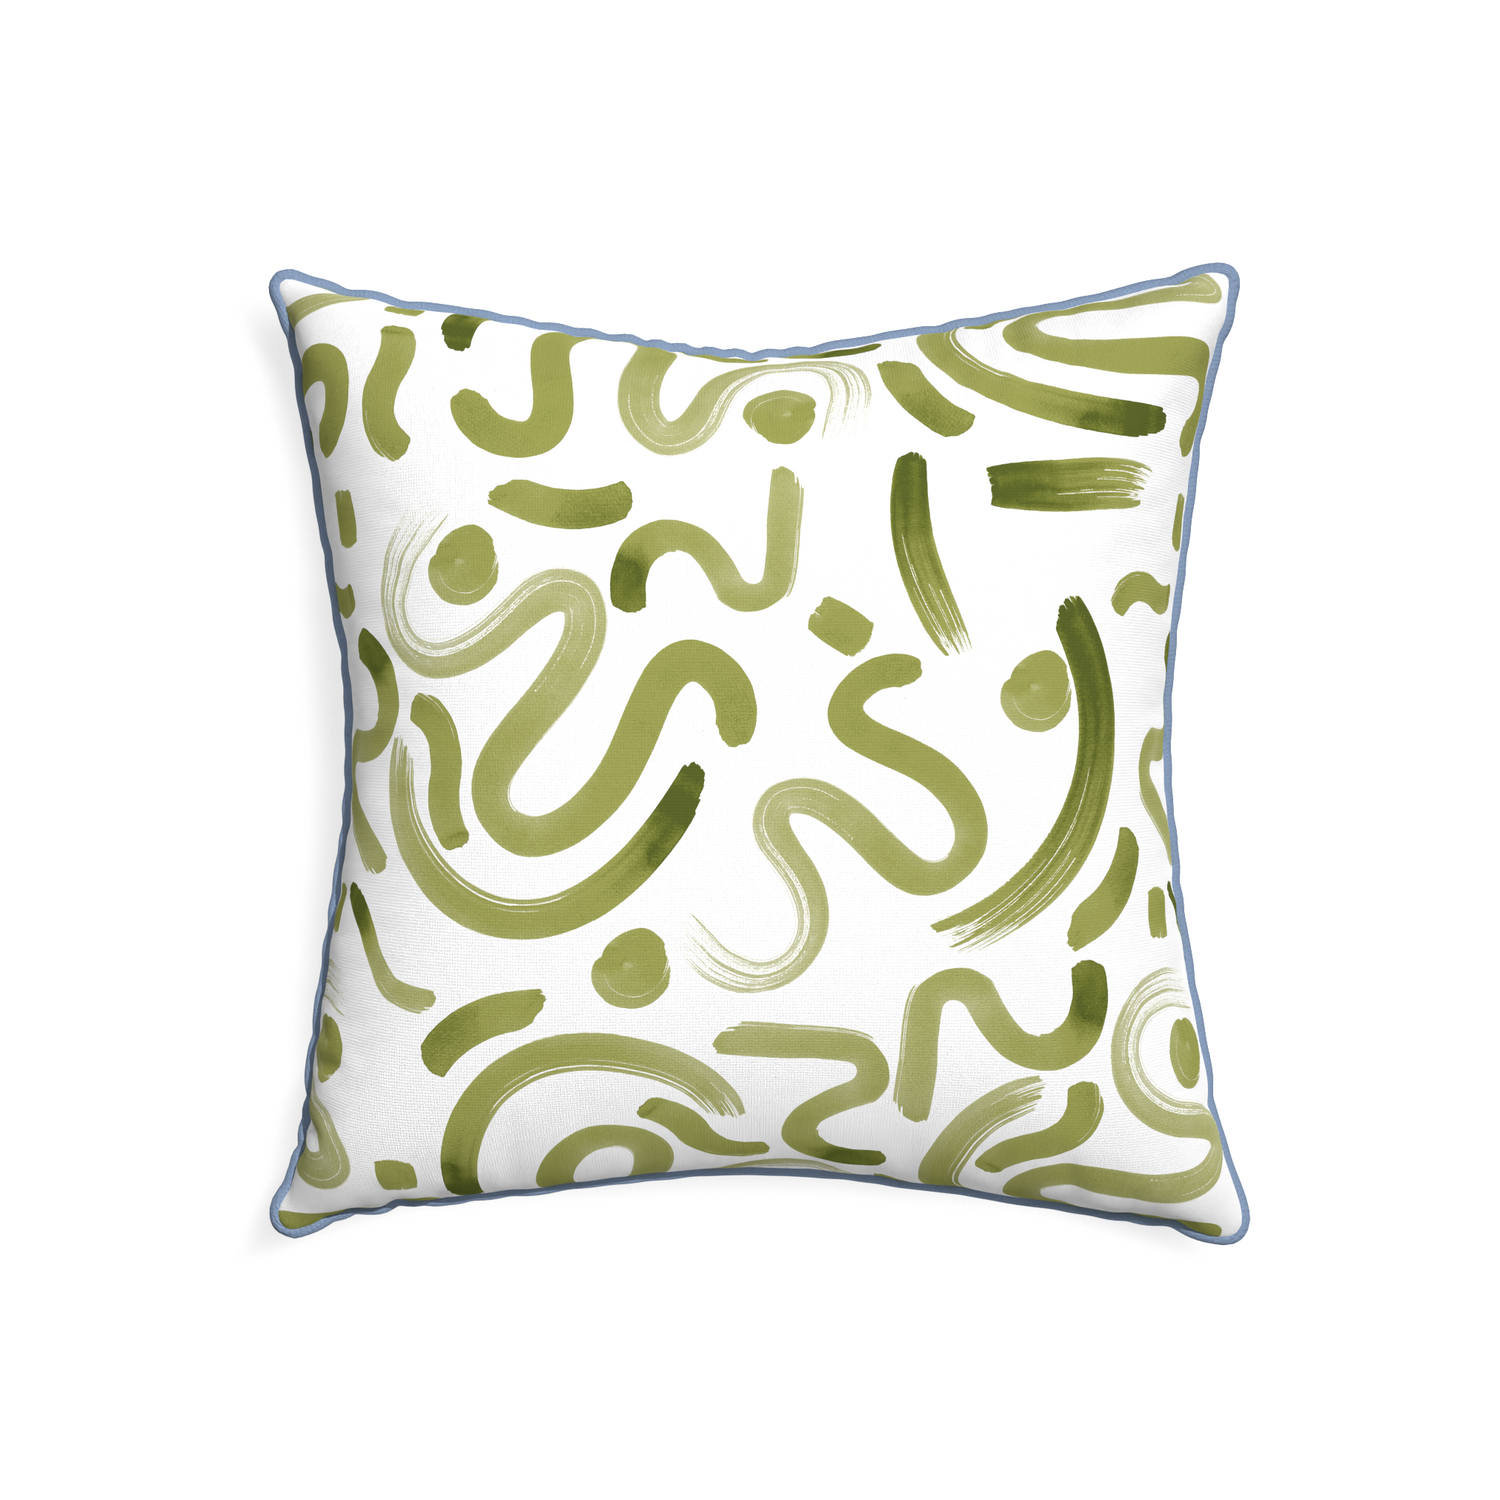 22-square hockney moss custom moss greenpillow with sky piping on white background